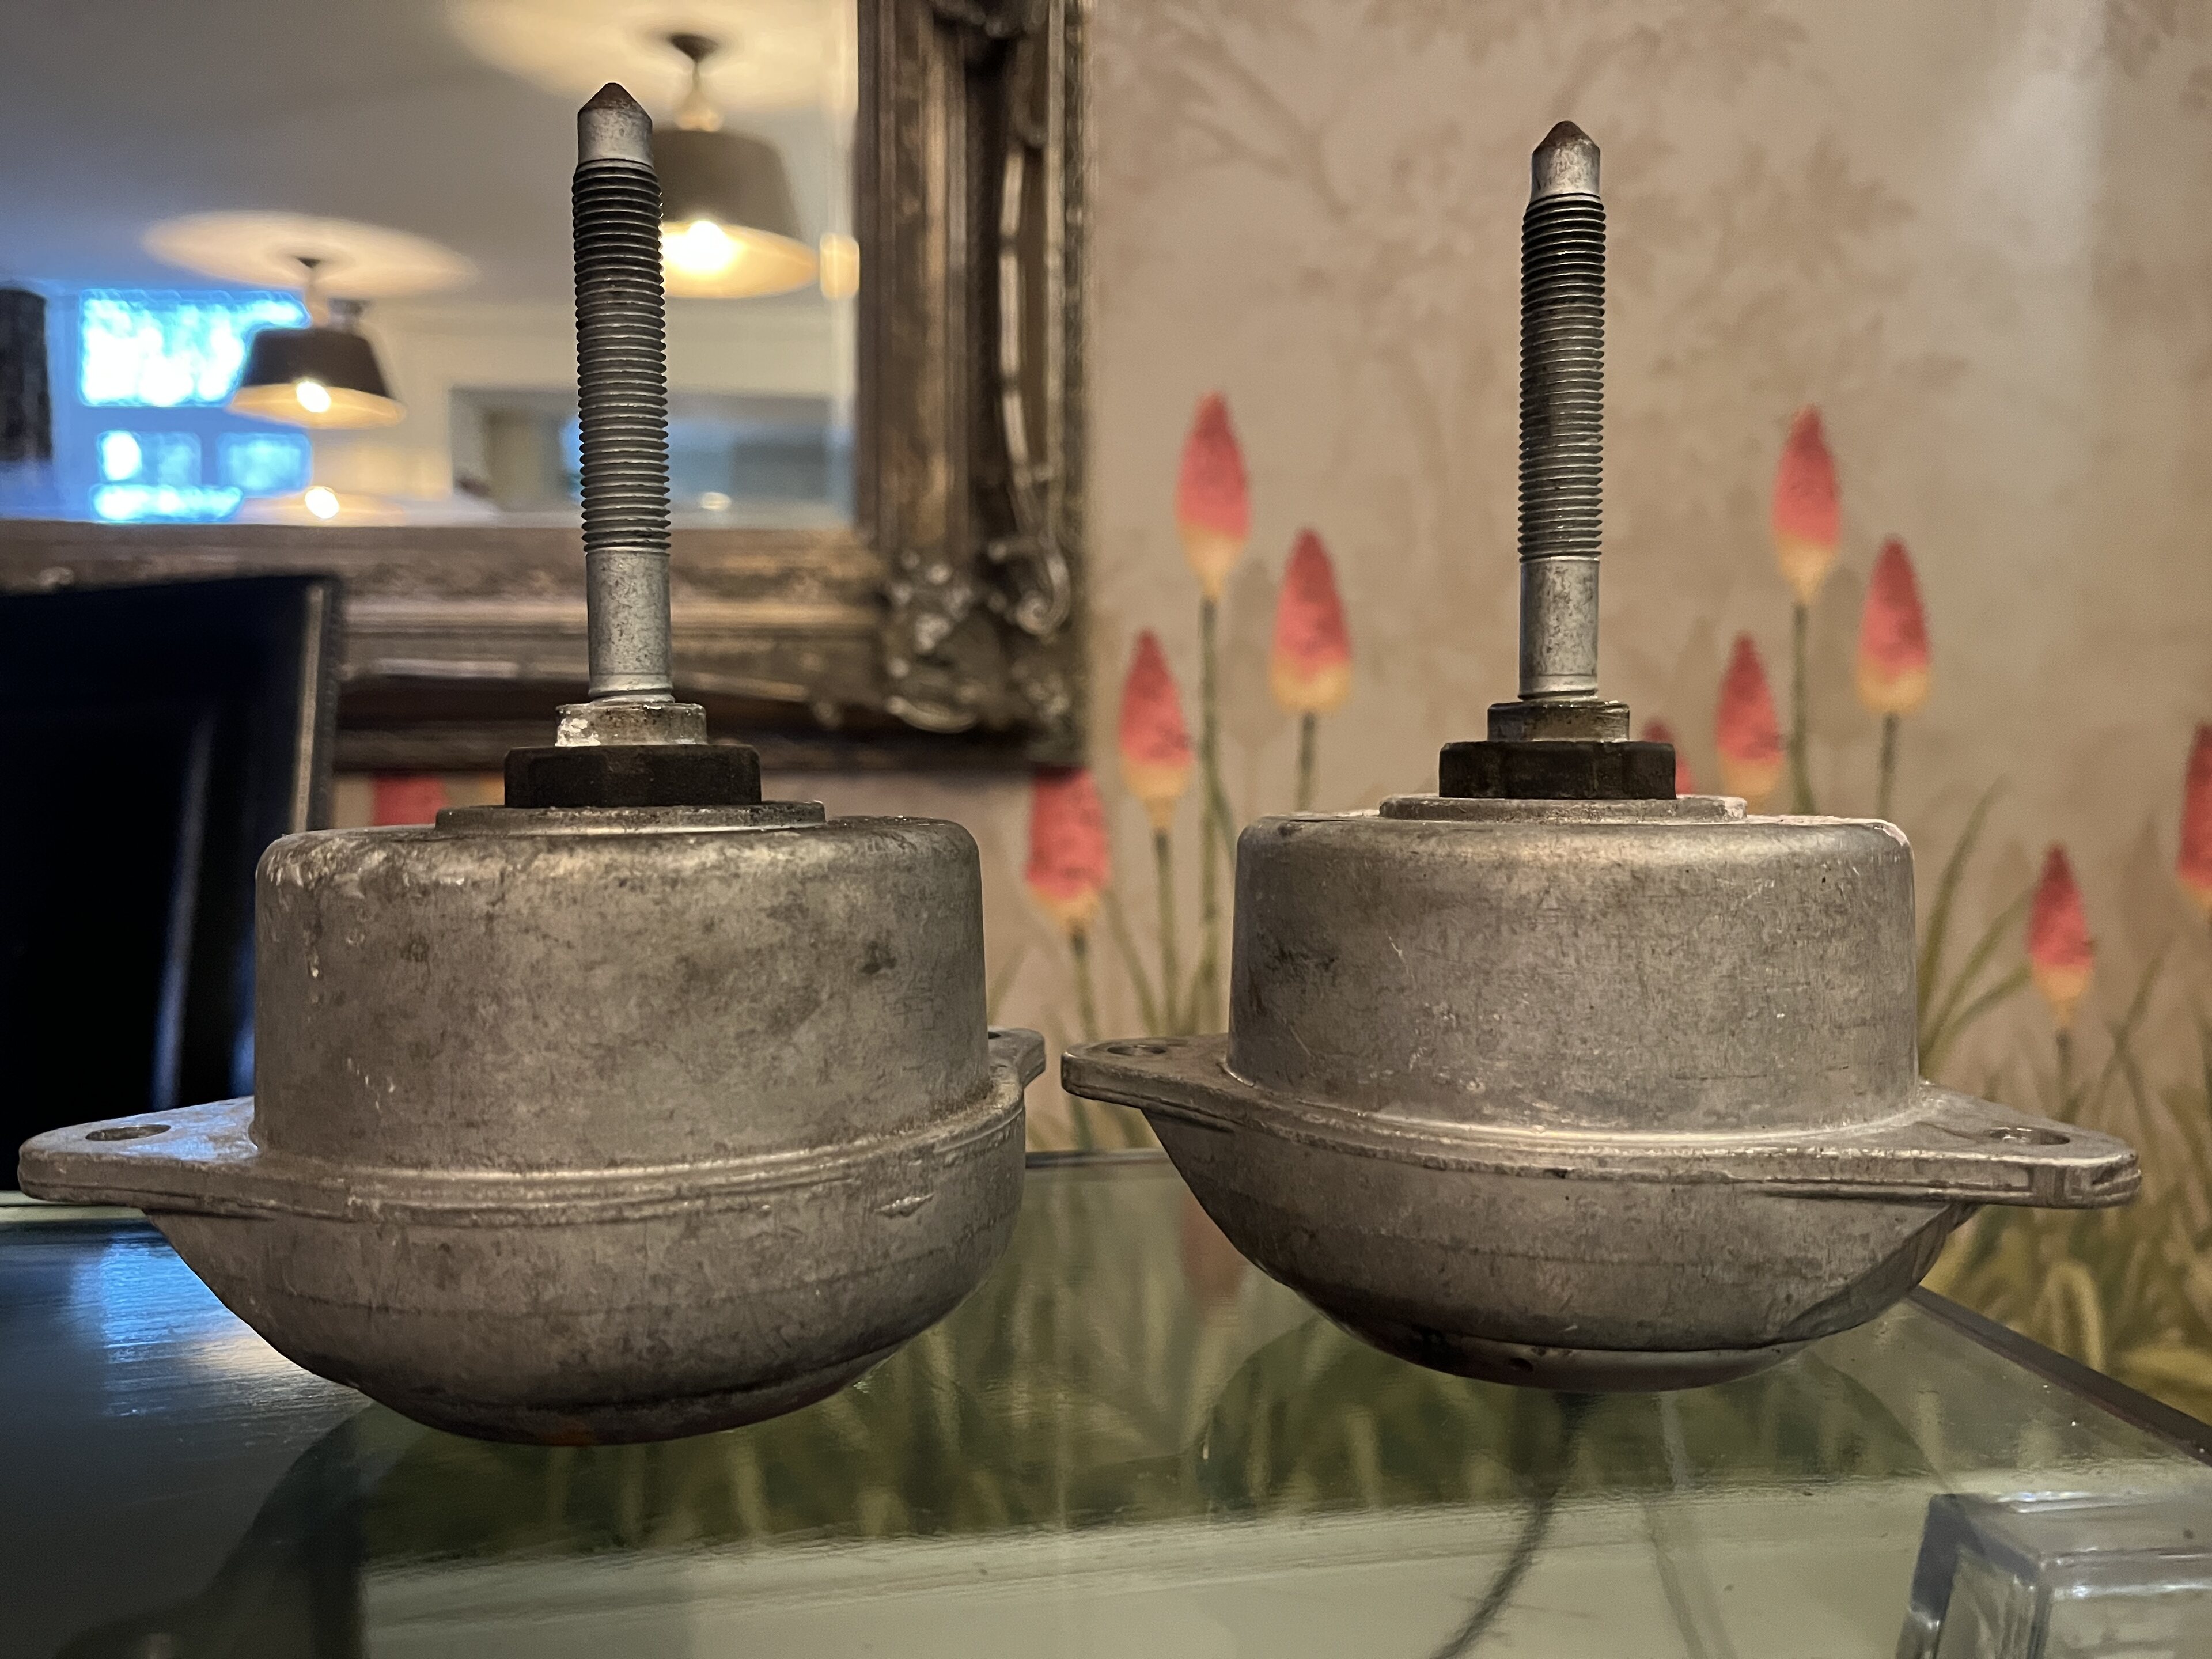 Pistonheads - The image shows two round, metal objects placed on a table. They appear to be a part of some machinery or device, given their structure and the presence of bolts and screws in them. The background includes a mirror and a framed picture with a floral motif on the wall, suggesting an interior setting, possibly a home or office. There is no text present in the image.